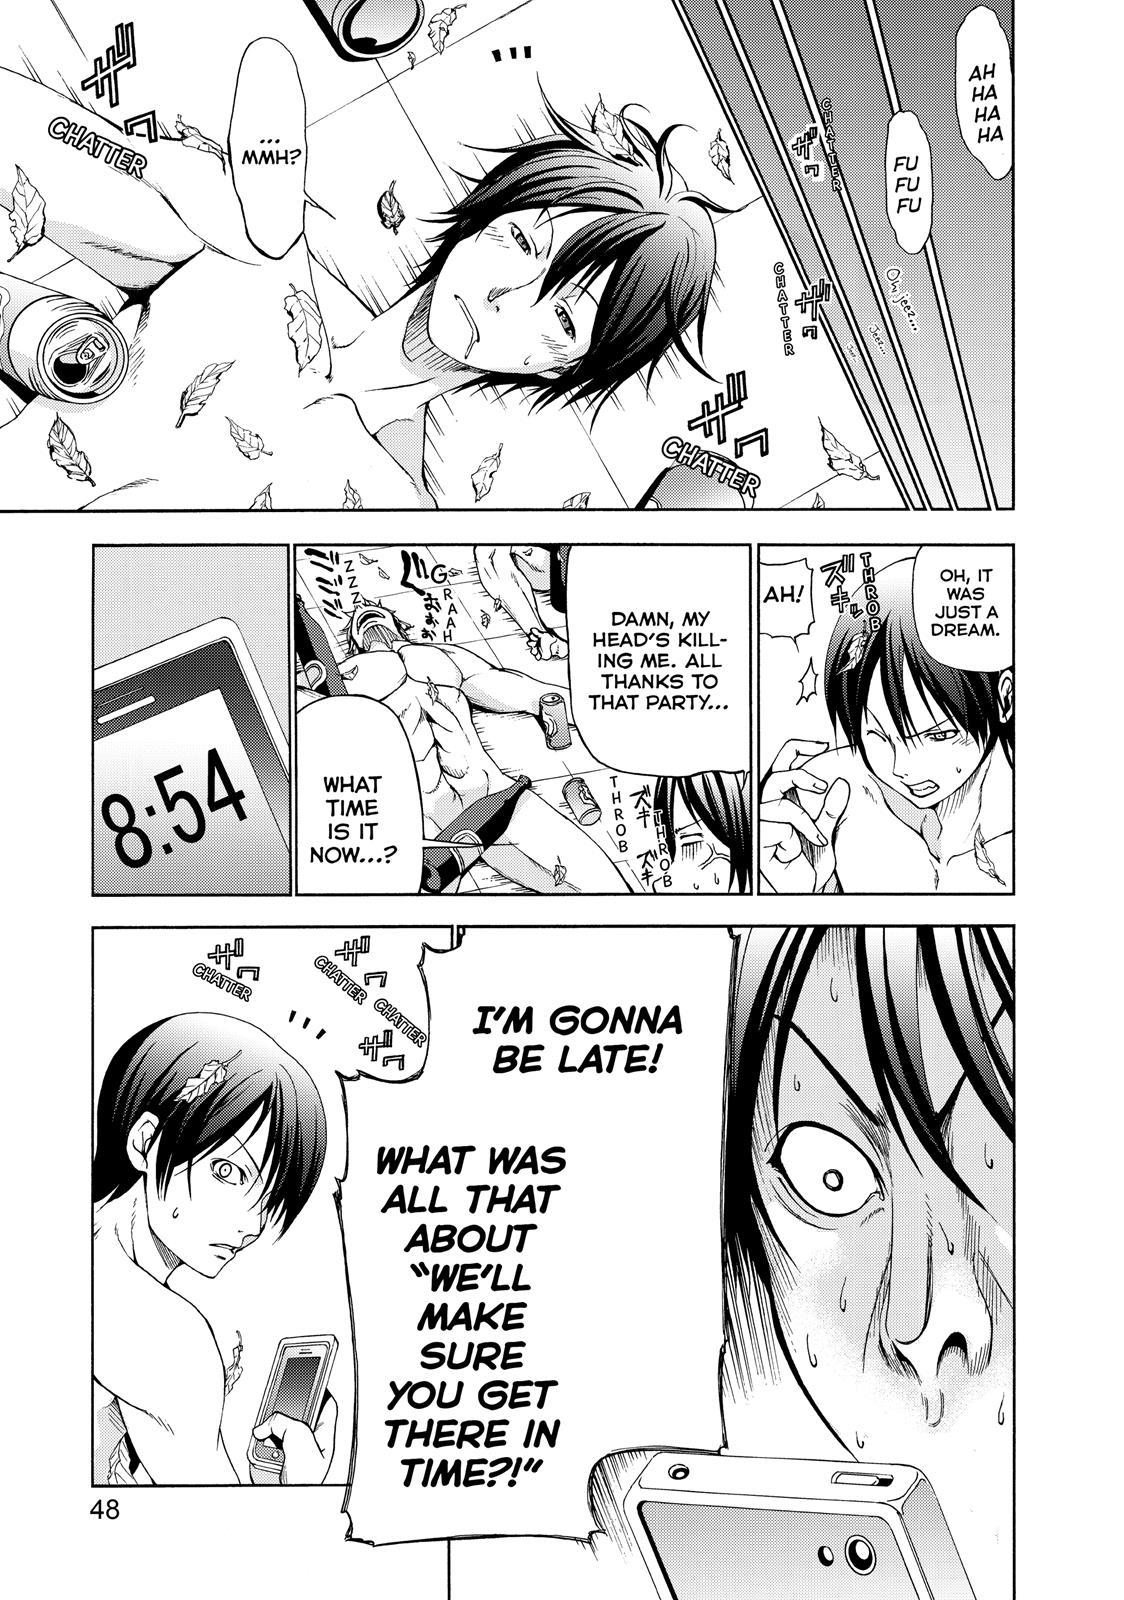 Grand Blue, Chapter 1 image 048